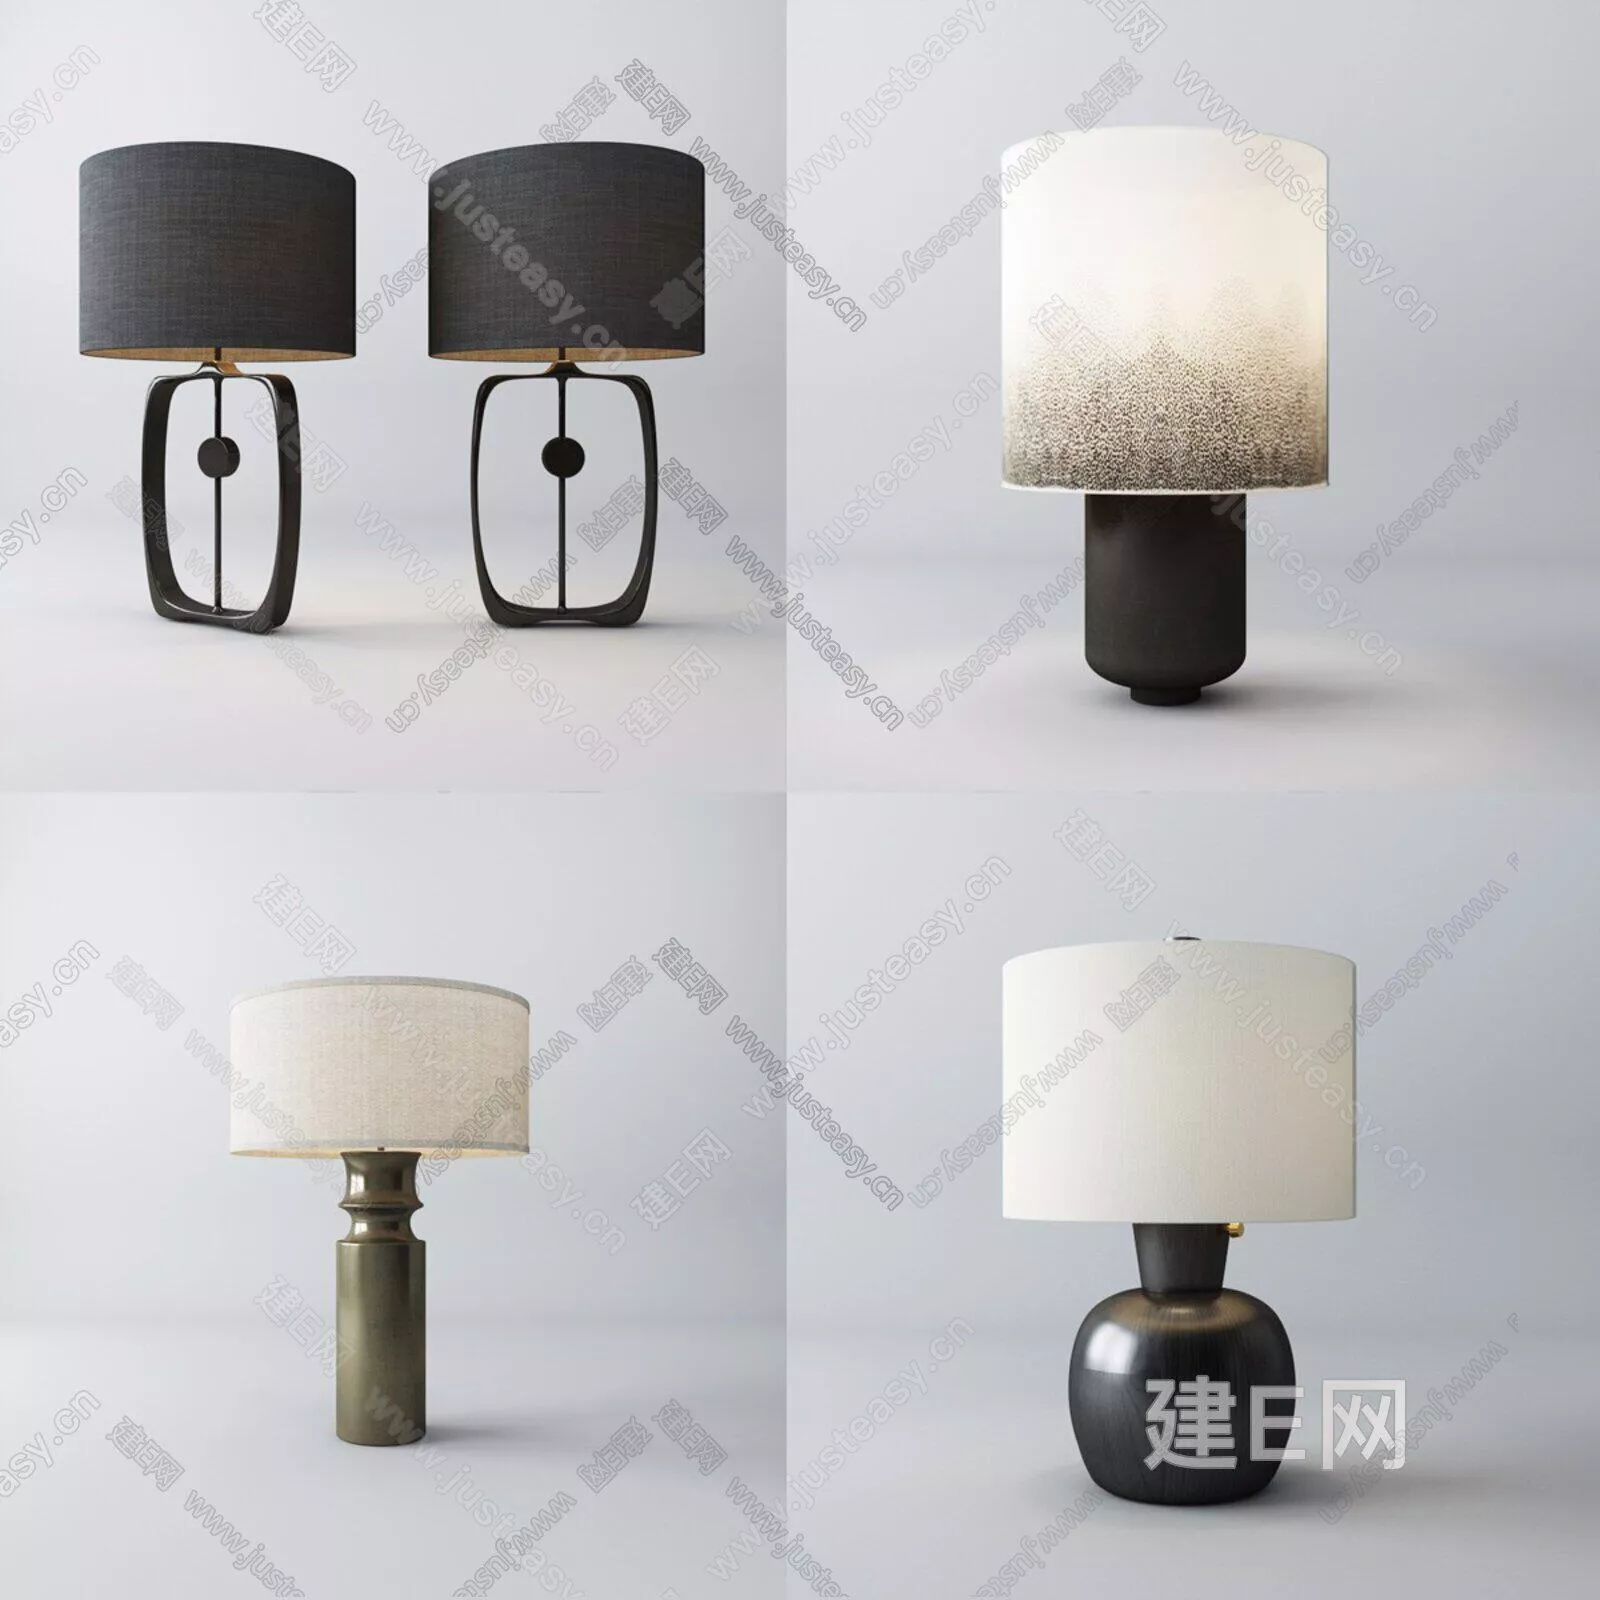 CHINESE TABLE LAMP - SKETCHUP 3D MODEL - ENSCAPE - 112741753